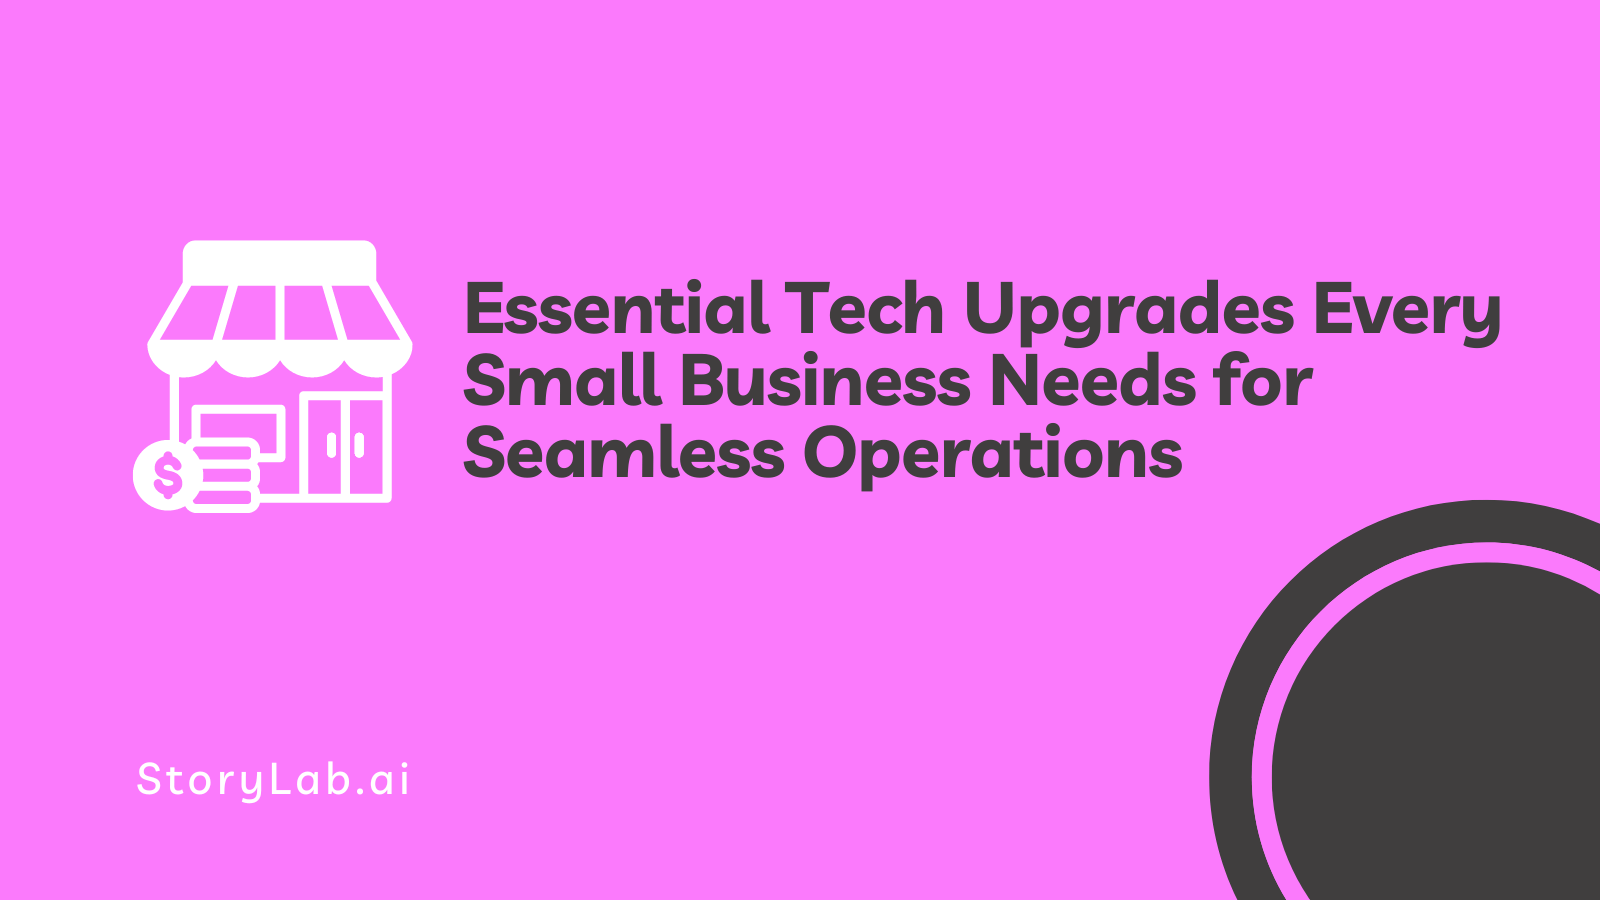 Essential Tech Upgrades Every Small Business Needs for Seamless Operations